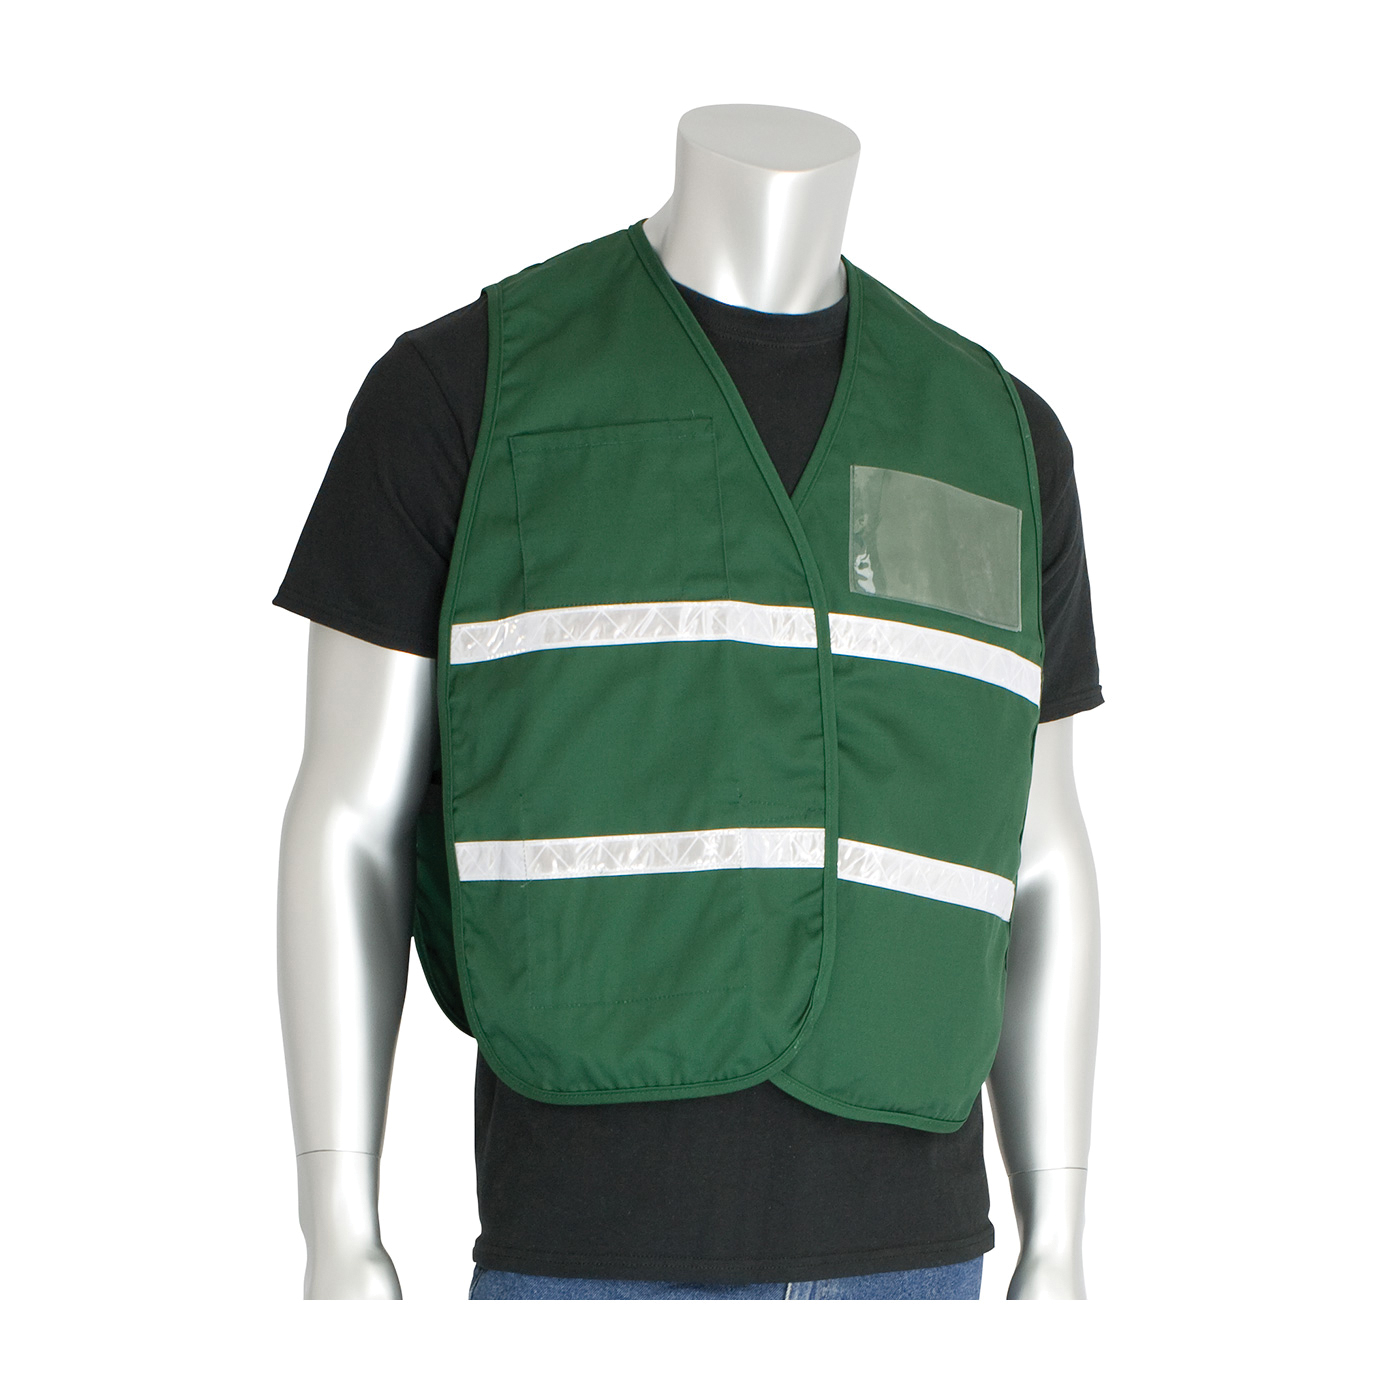 PIP® 300-2514/4X-5X 300-2500 Non-ANSI Incident Command Vest, 4XL/5XL, Forest Green, 35% Cotton/65% Polyester, Hook and Loop Closure, 4 Pockets